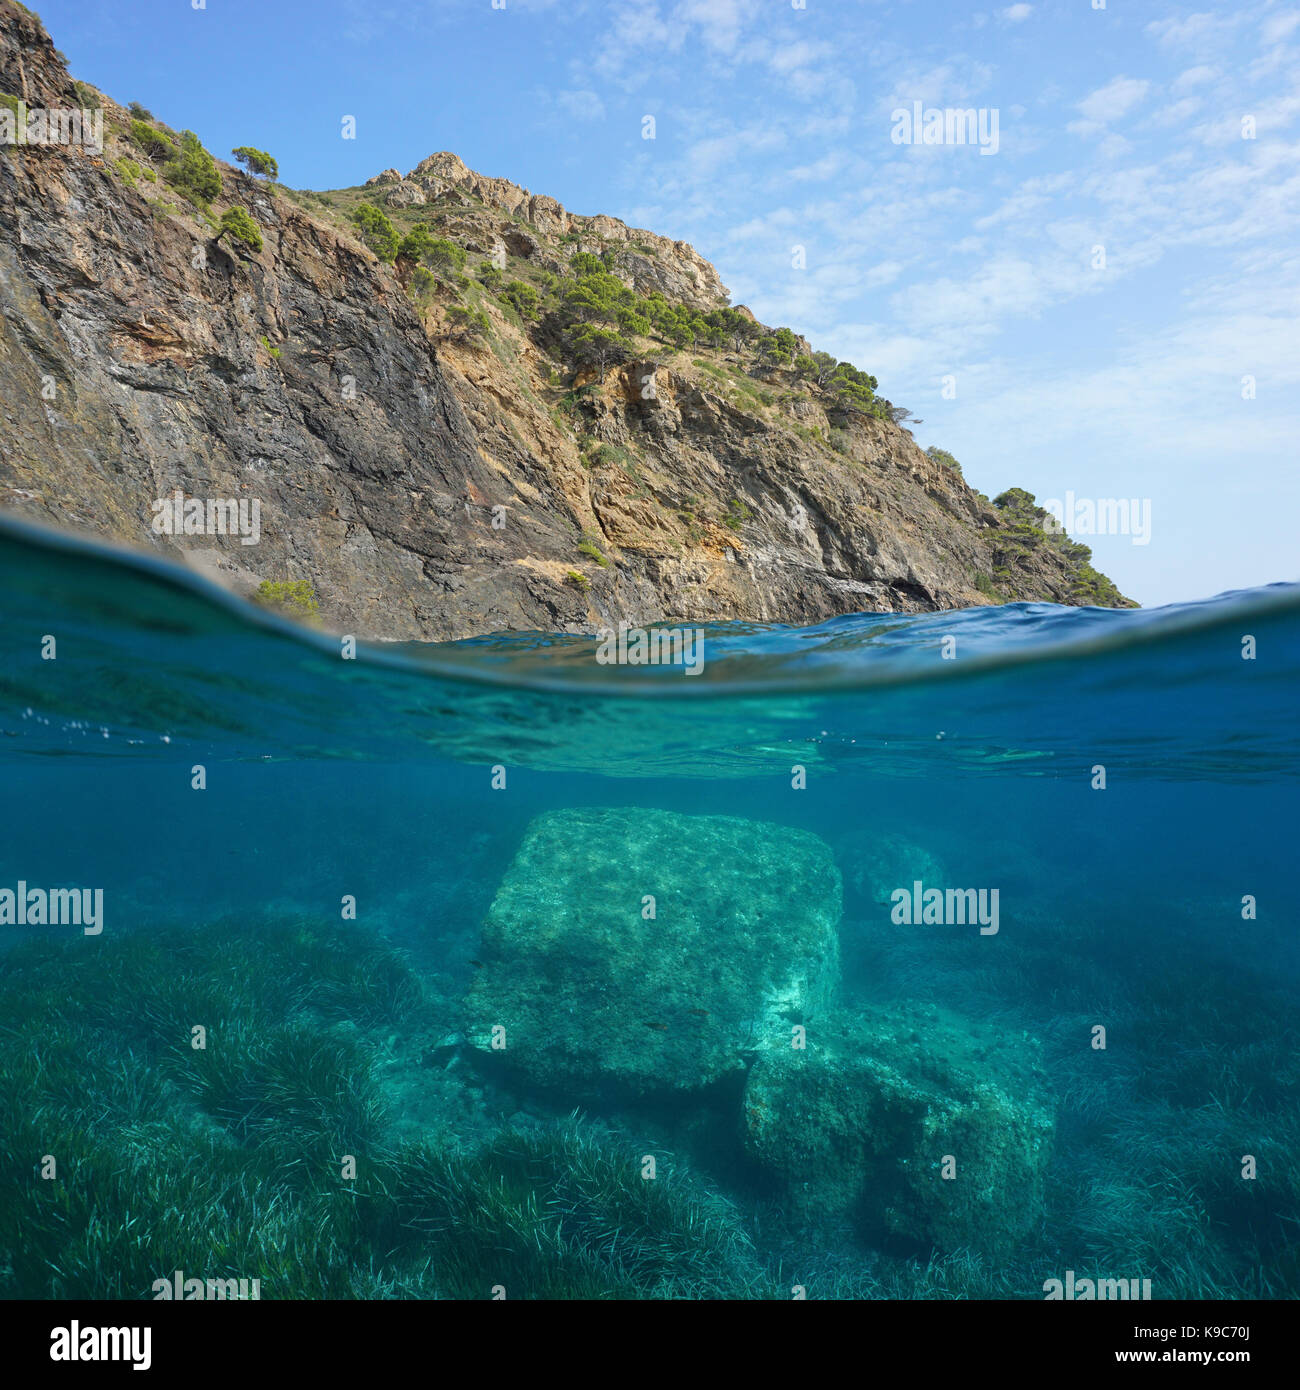 Coastal landscape over and under water surface, cliff with rocks and neptune grass underwater, Mediterranean sea, Cap Norfeu, Costa Brava, Spain Stock Photo